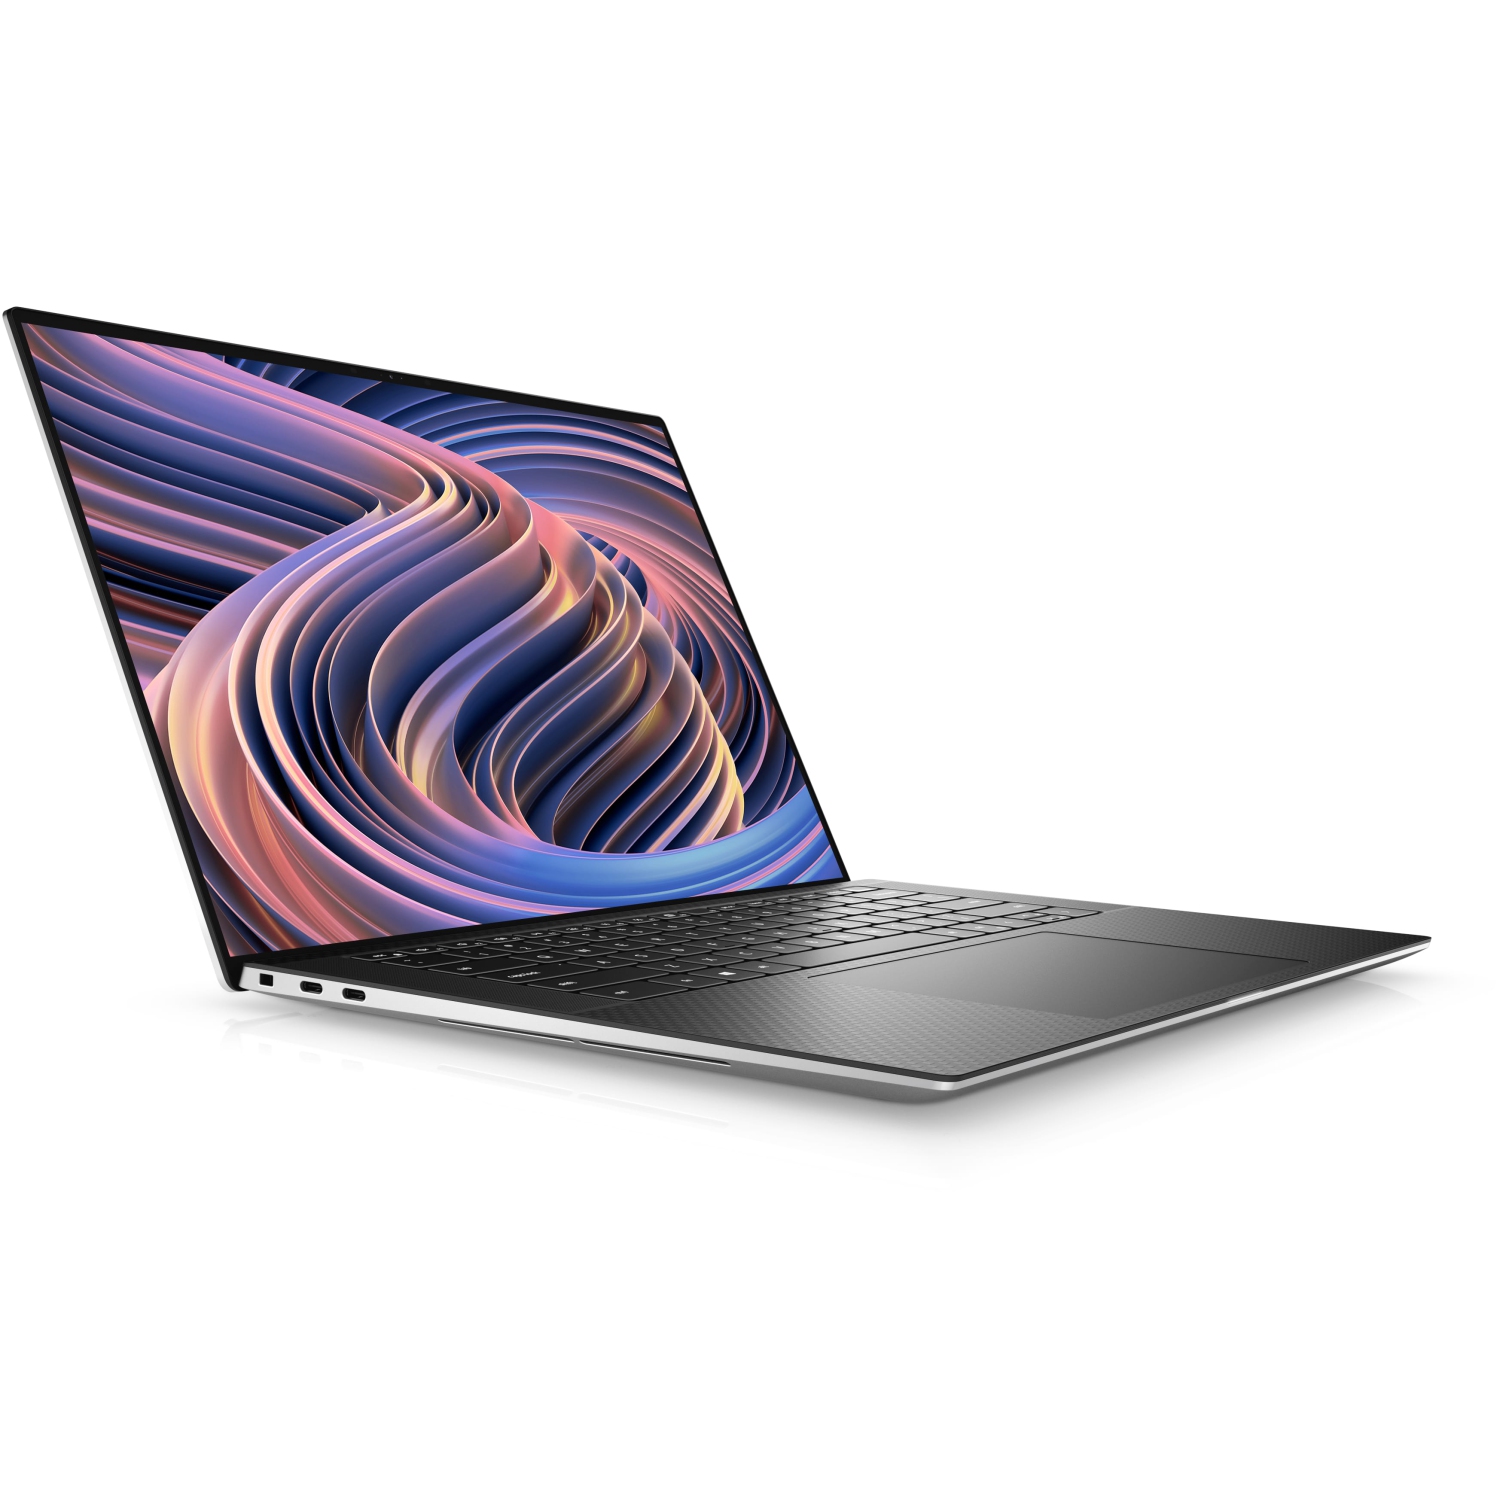 Refurbished (Excellent) Dell XPS 15 9520, 15" 4K UHD Touch, Nvidia RTX 3050Ti, i7-12700H, 16GB, 512GB SSD, WIN 11 HOME